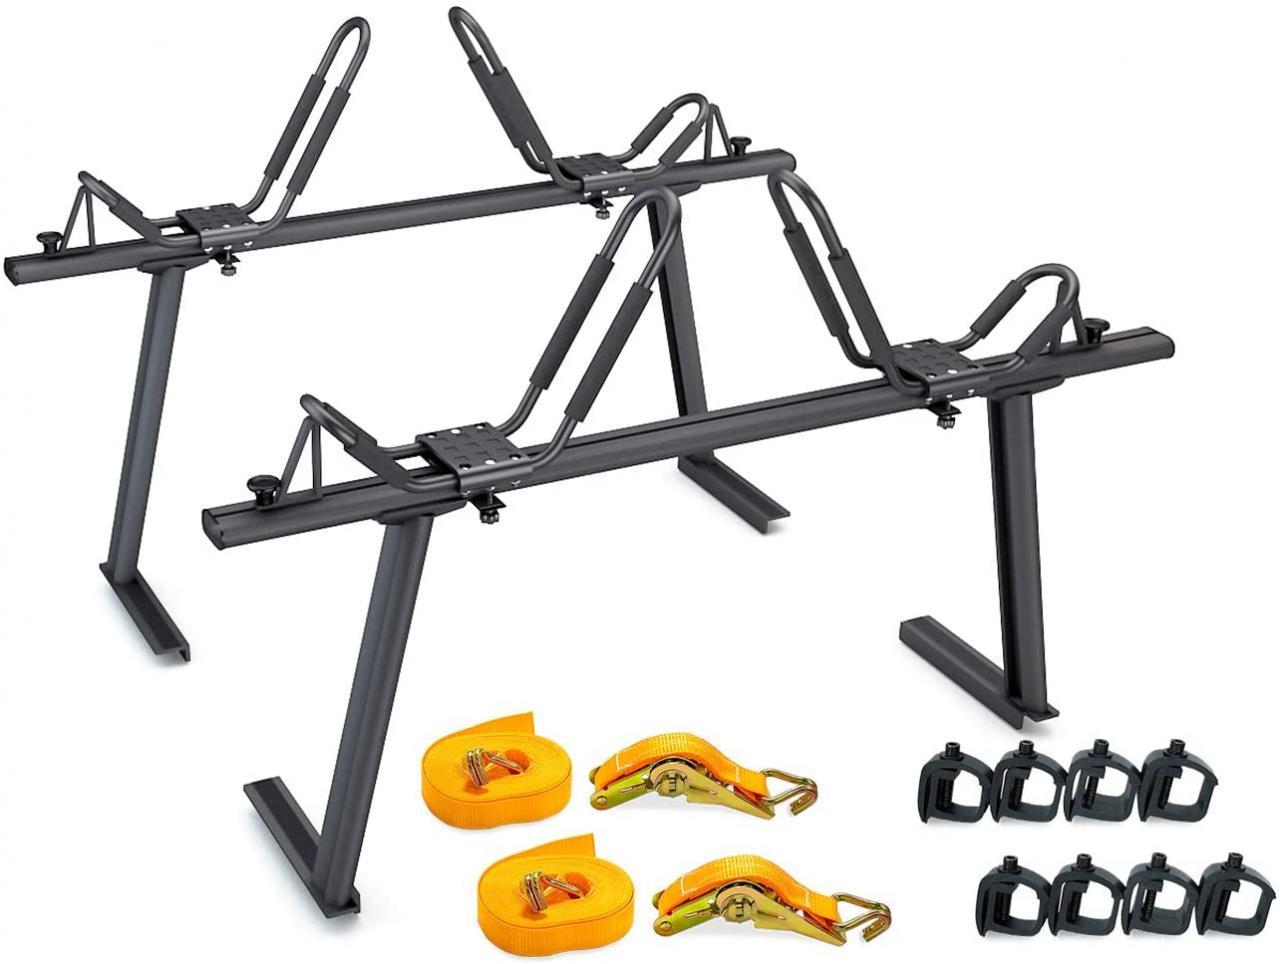 Model APX25 Aluminum Truck Rack with 8 Non-Drilling C-Clamps and 2 Sets  Kayak J-Racks with Ratchet Lashing Straps & Ratchet Bow and Stern Tie Down  Straps | tastesutra.com